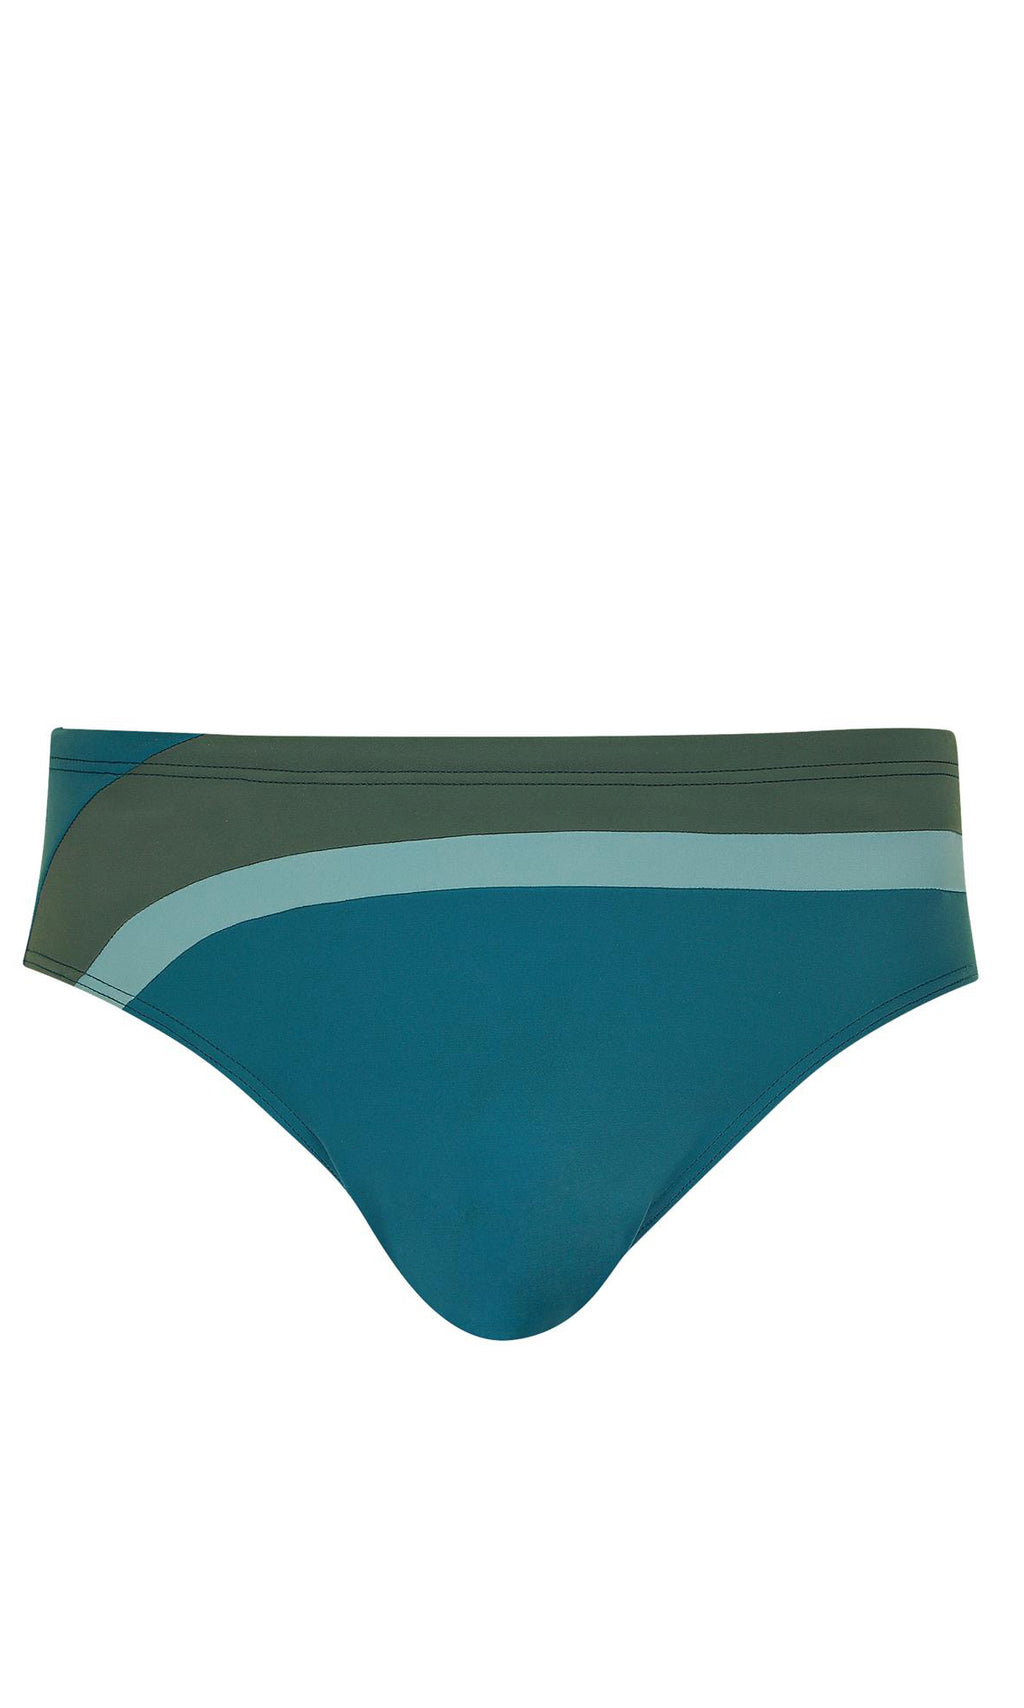 Classic Trunks Green Oasis, Special Order S - L